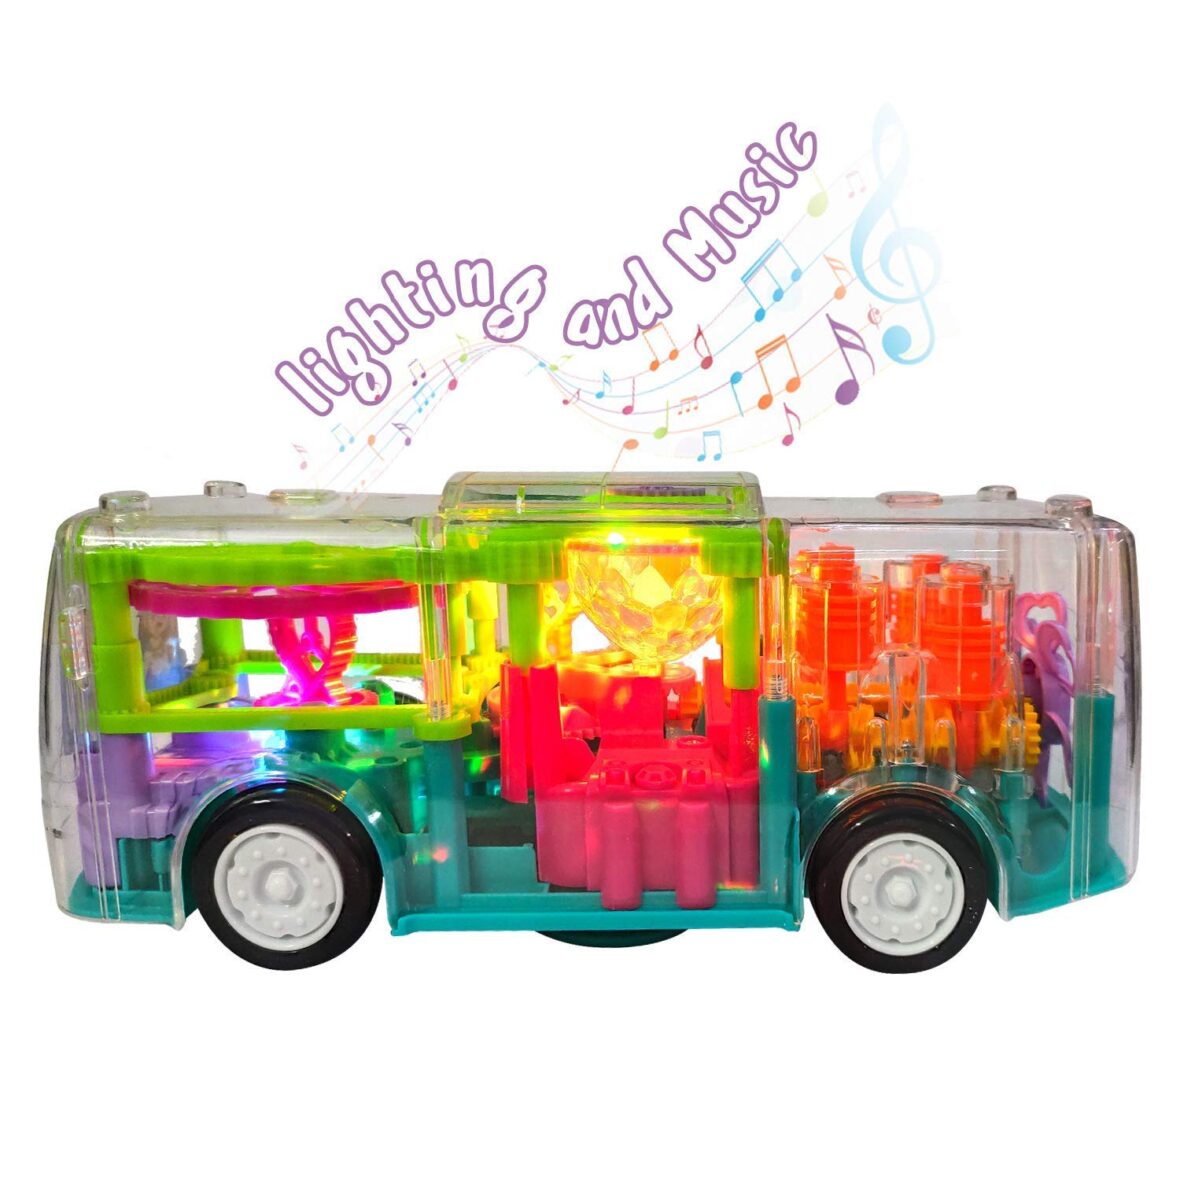 Concept Bus Toy with 3D Led Lights and Musical Effect, Transparent Toy Bus for Kids, Pack of 1